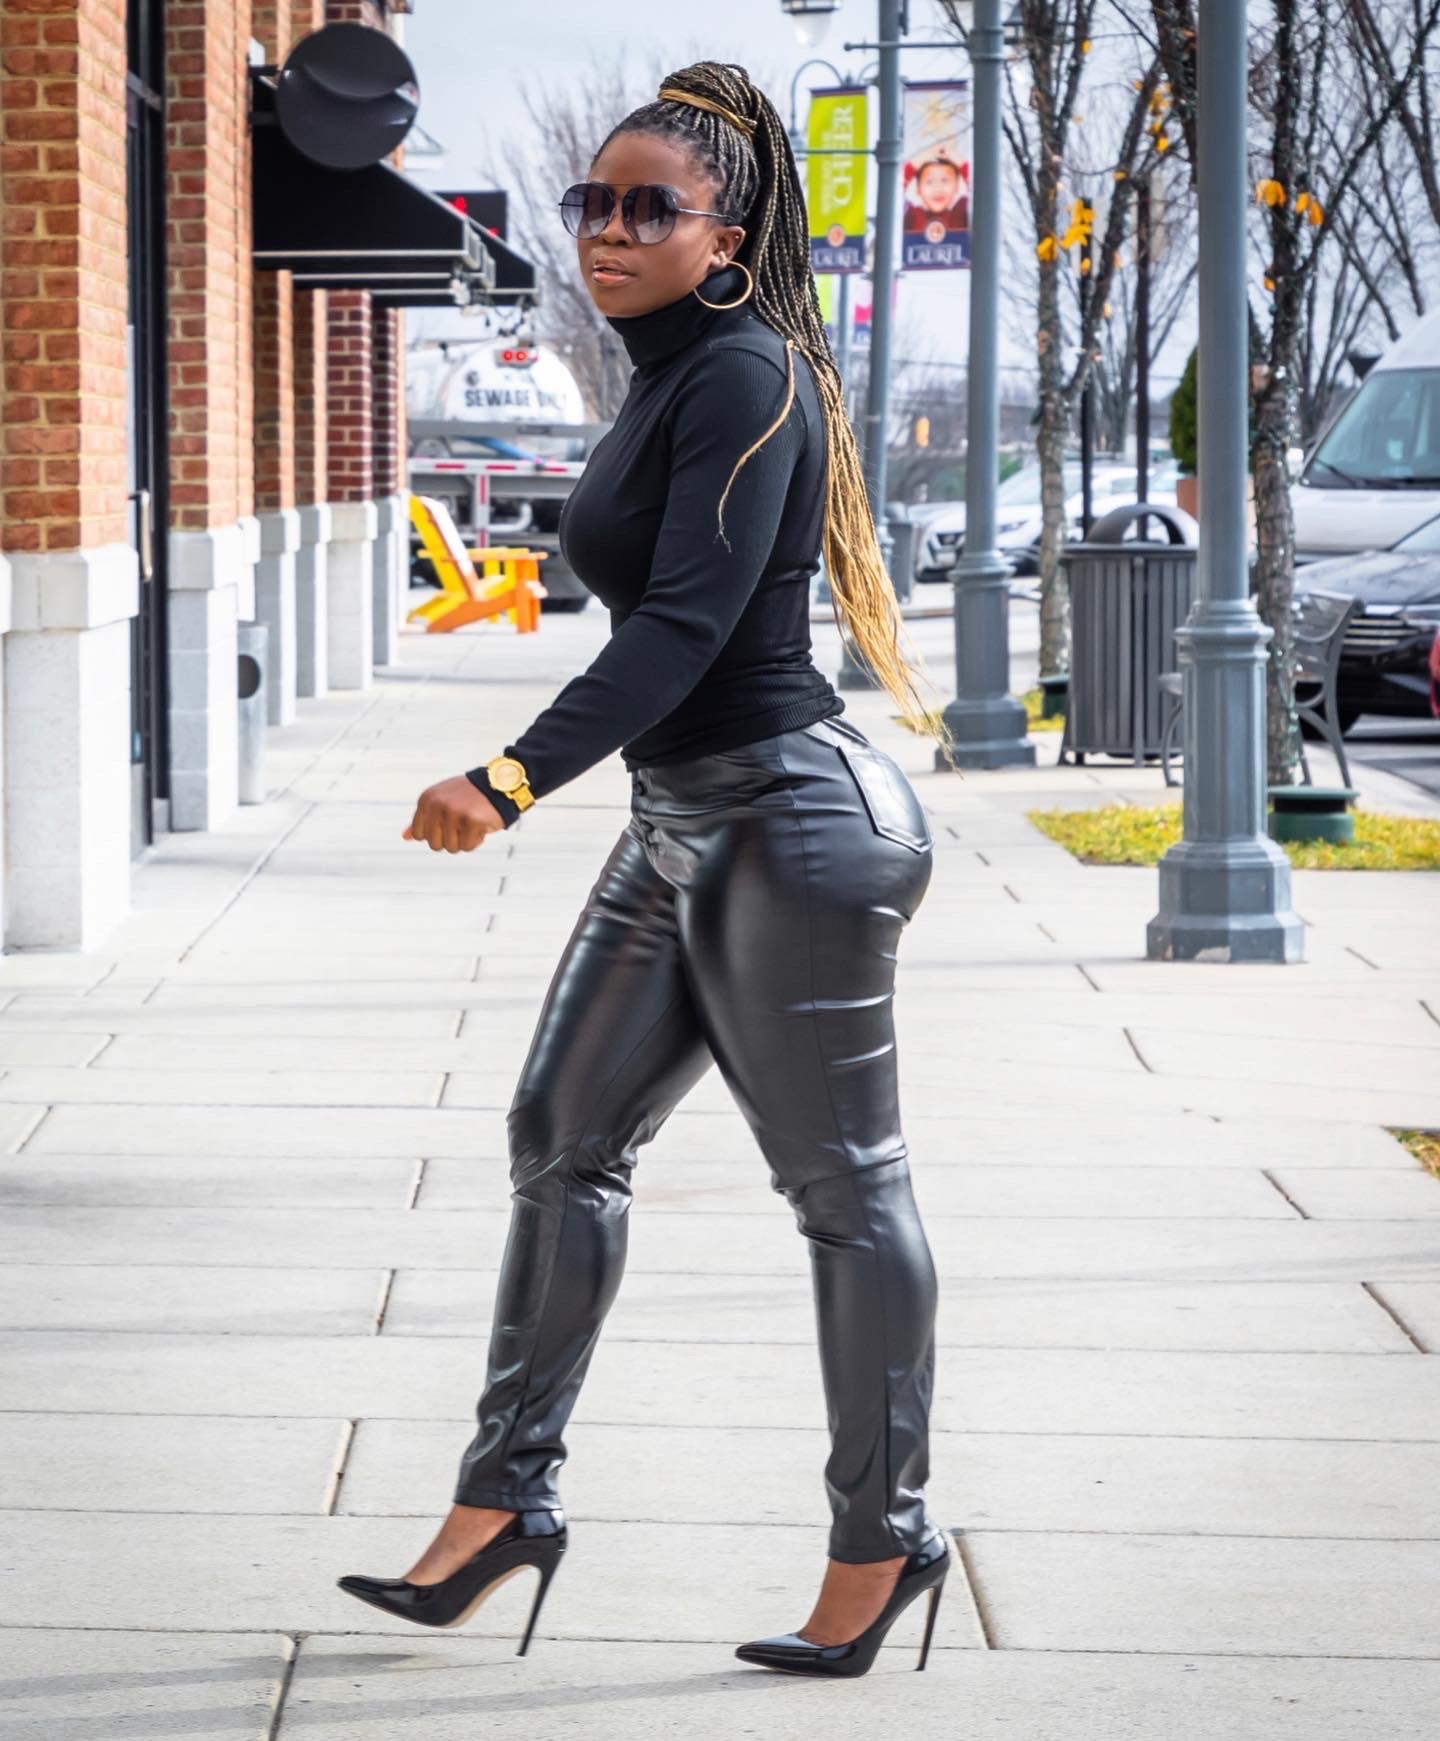 BLACK BUTTON UP FAUX LEATHER SKINNY PANTS